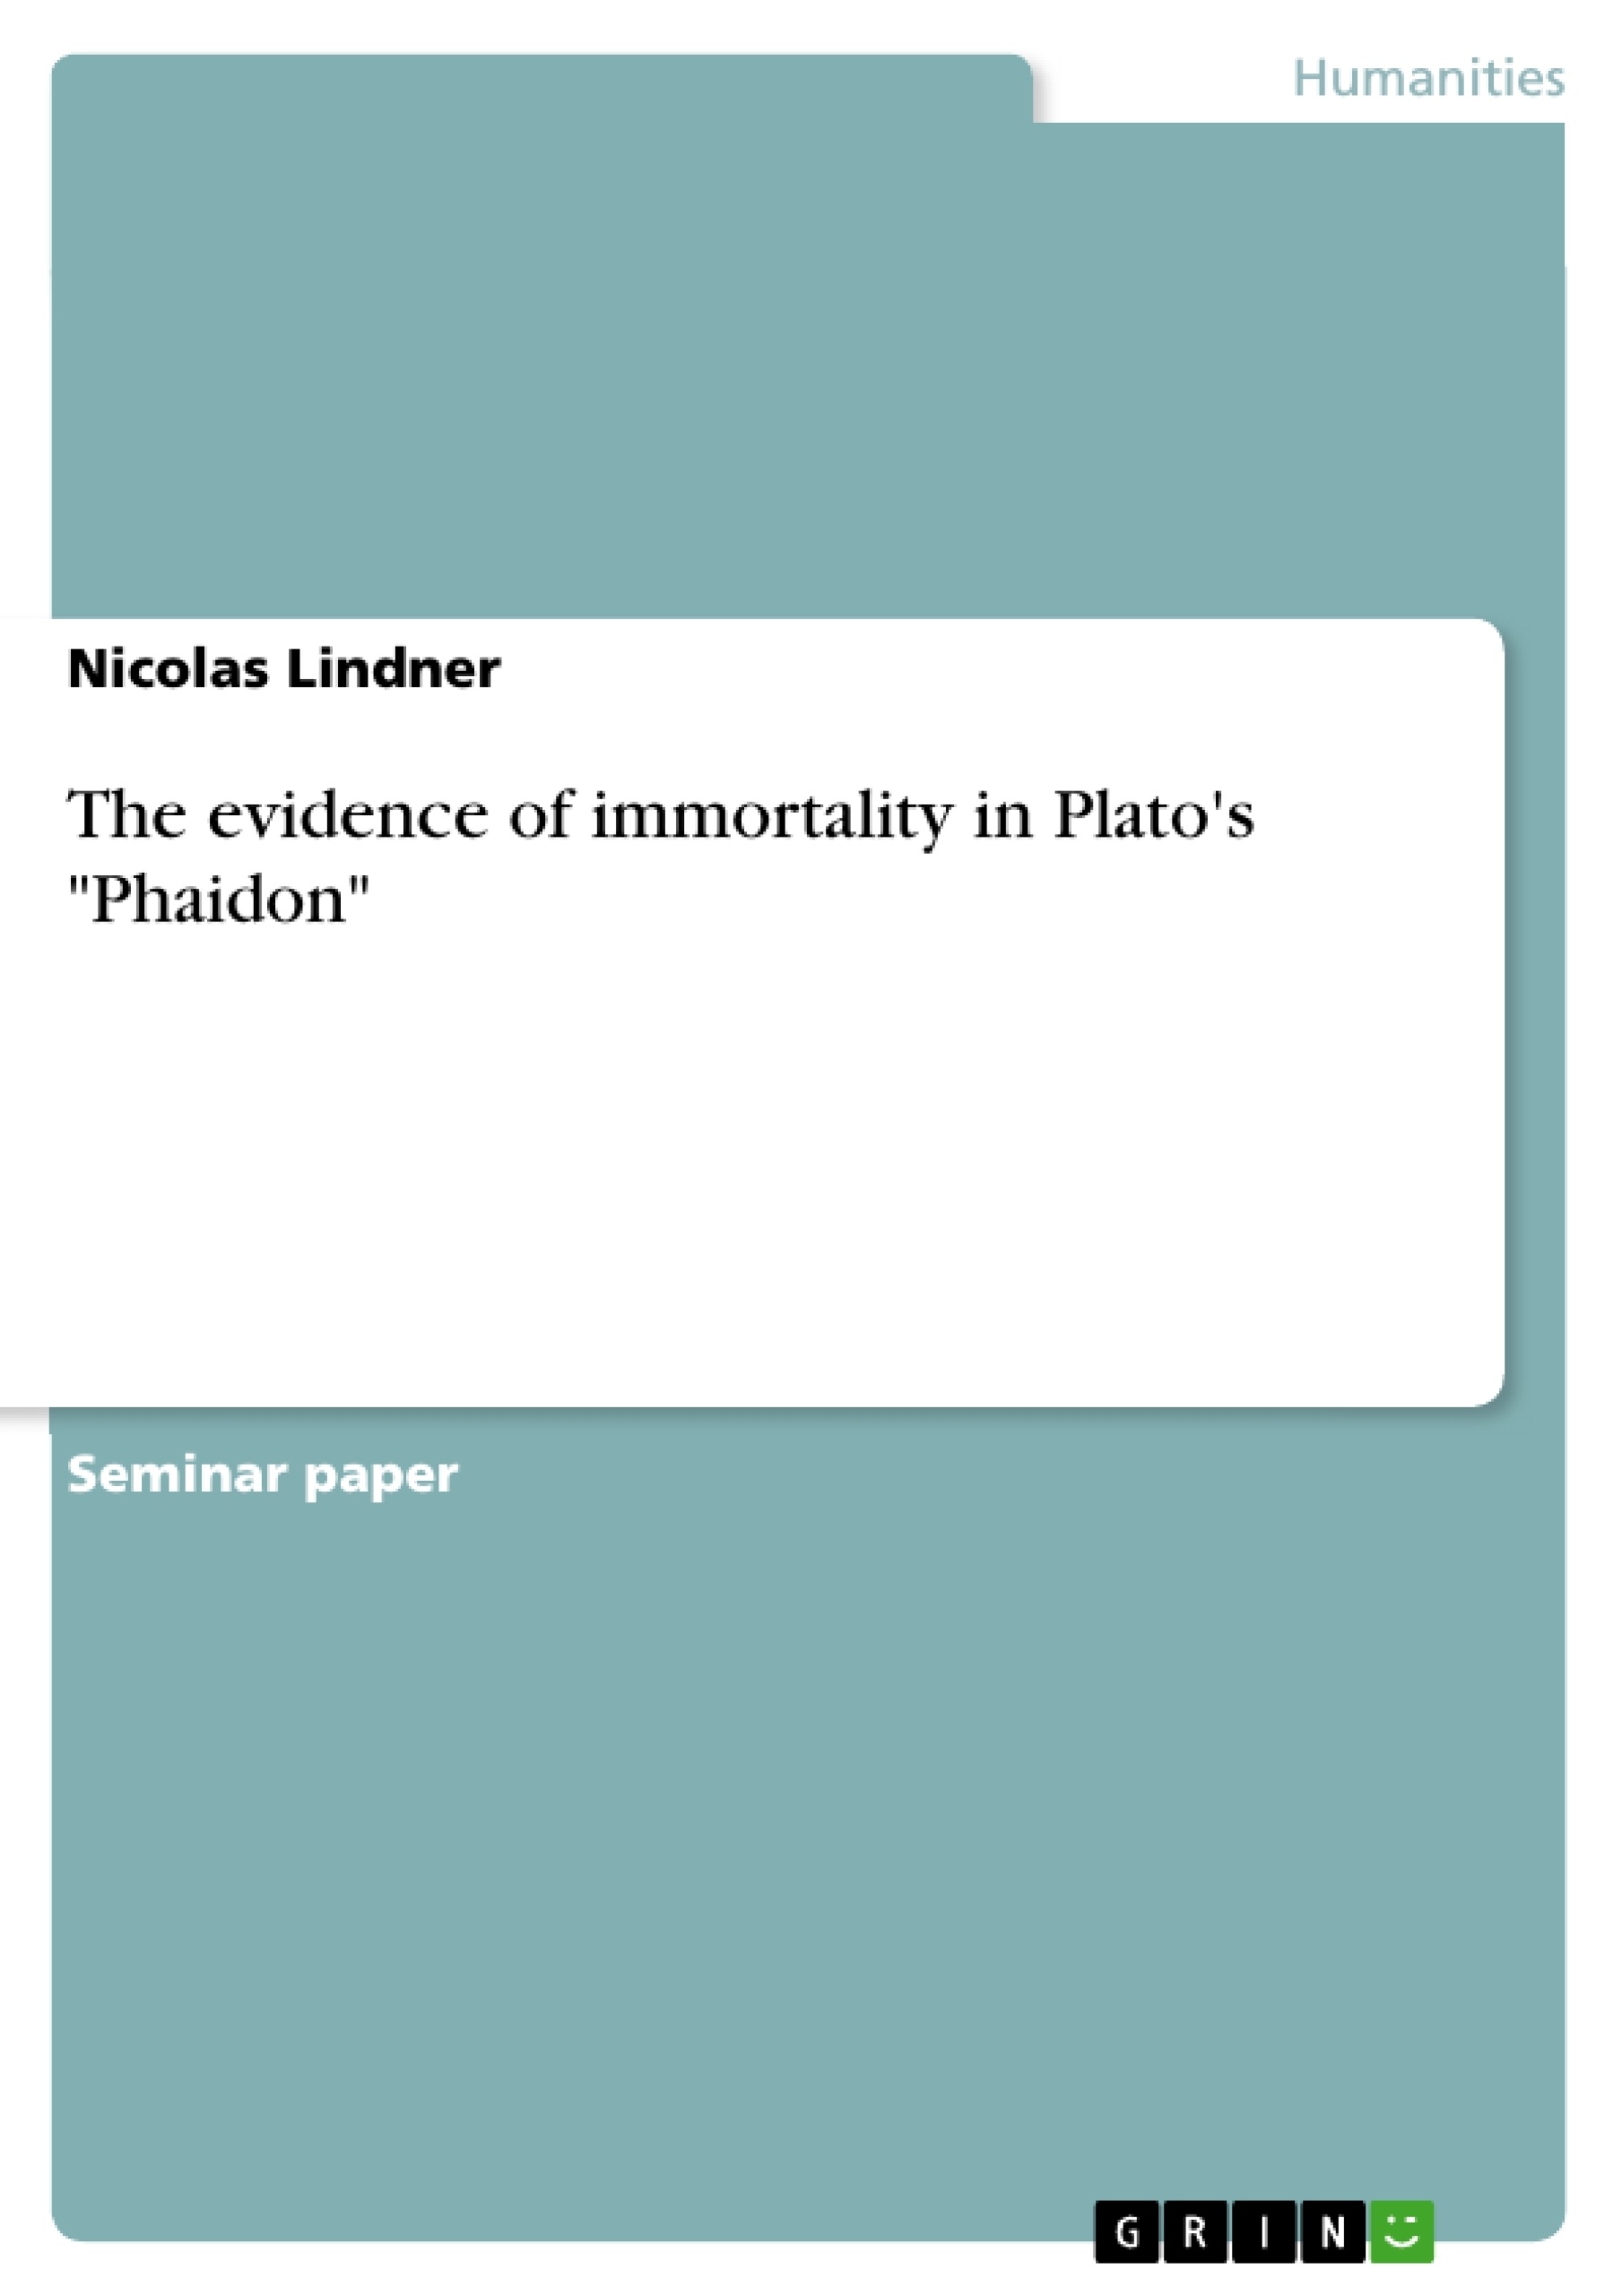 Title: The evidence of immortality in Plato's "Phaidon"